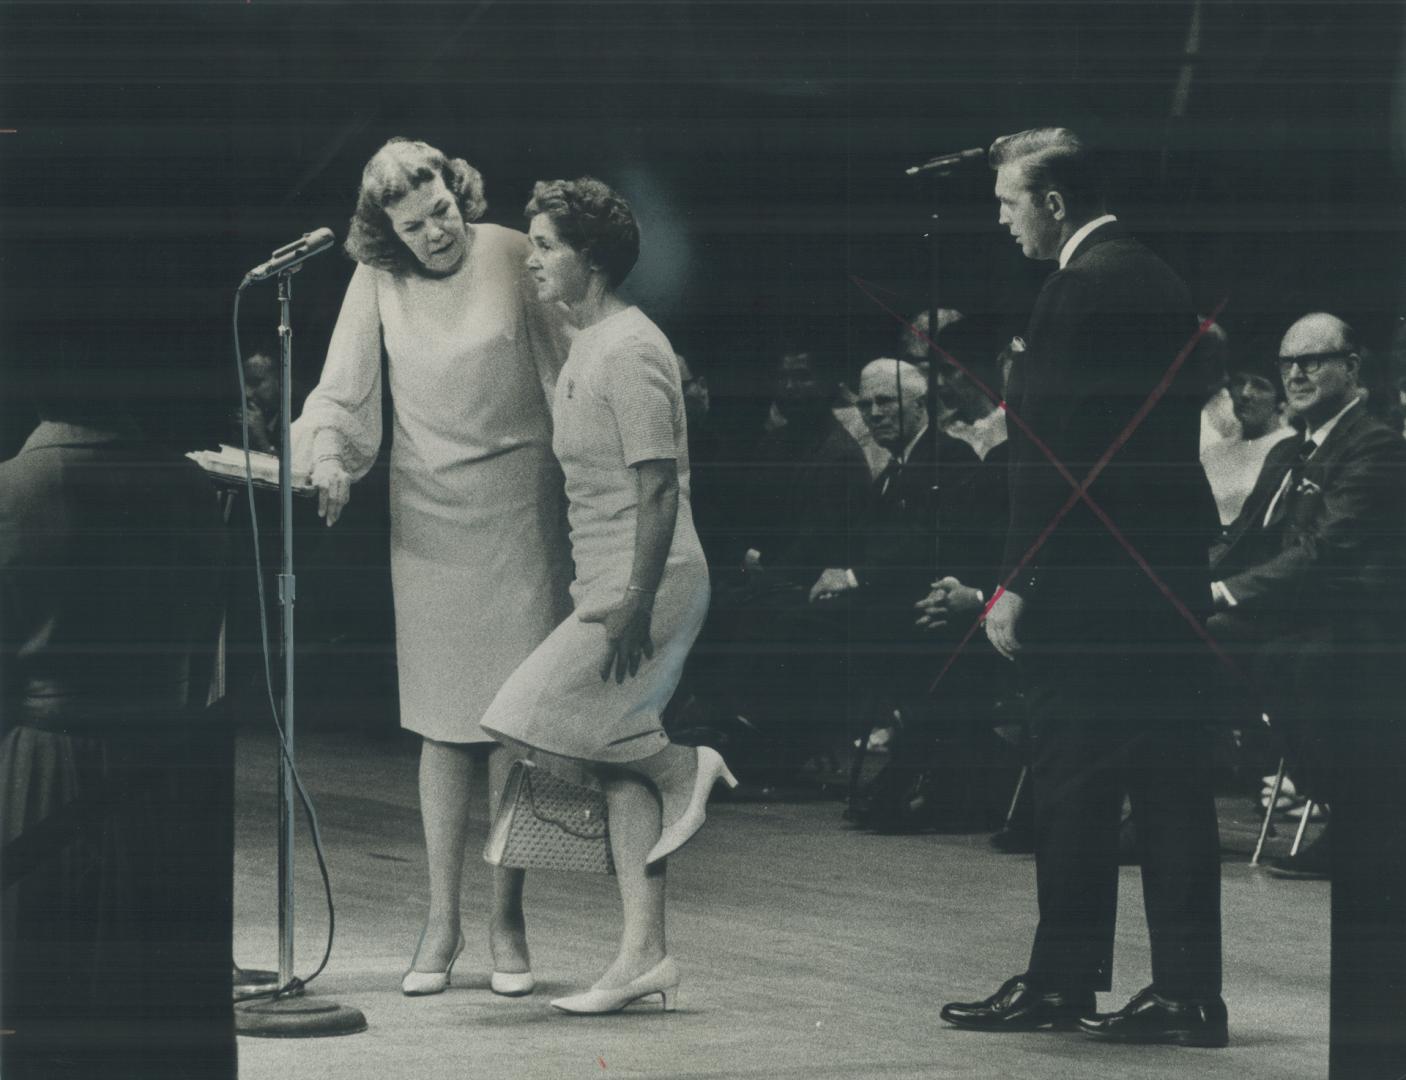 Kathryn Kuhlman, who appeared here in a service at Toronto's O'Keefe Centre last year, now holds services regularly at First Presbyterian Church in Pittsburgh